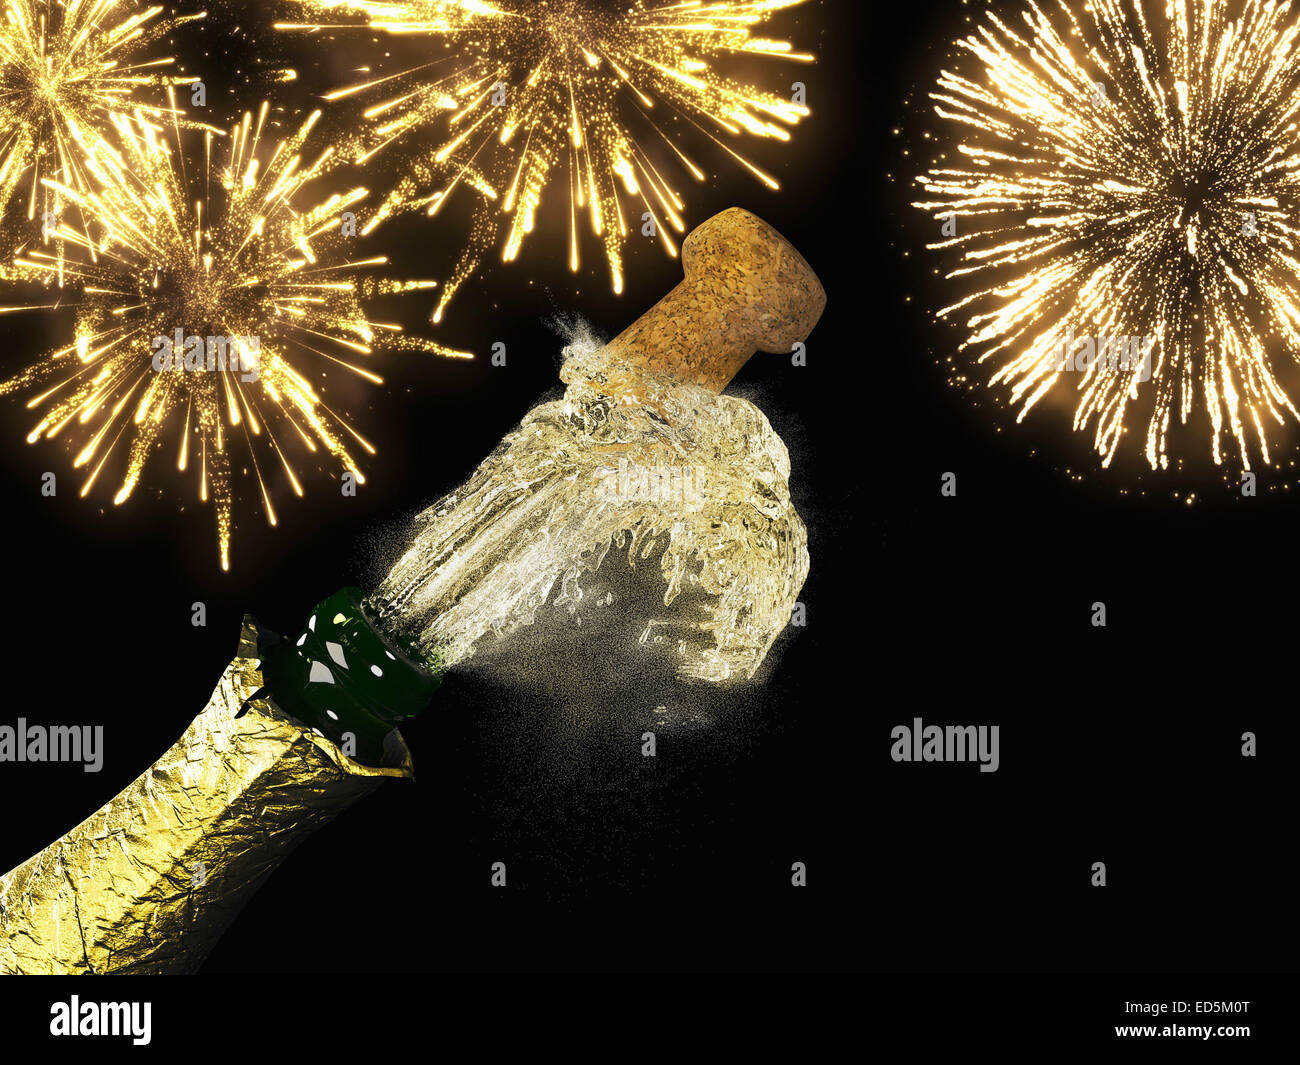 Champagne bottle and cork with lit firework Stock Photo